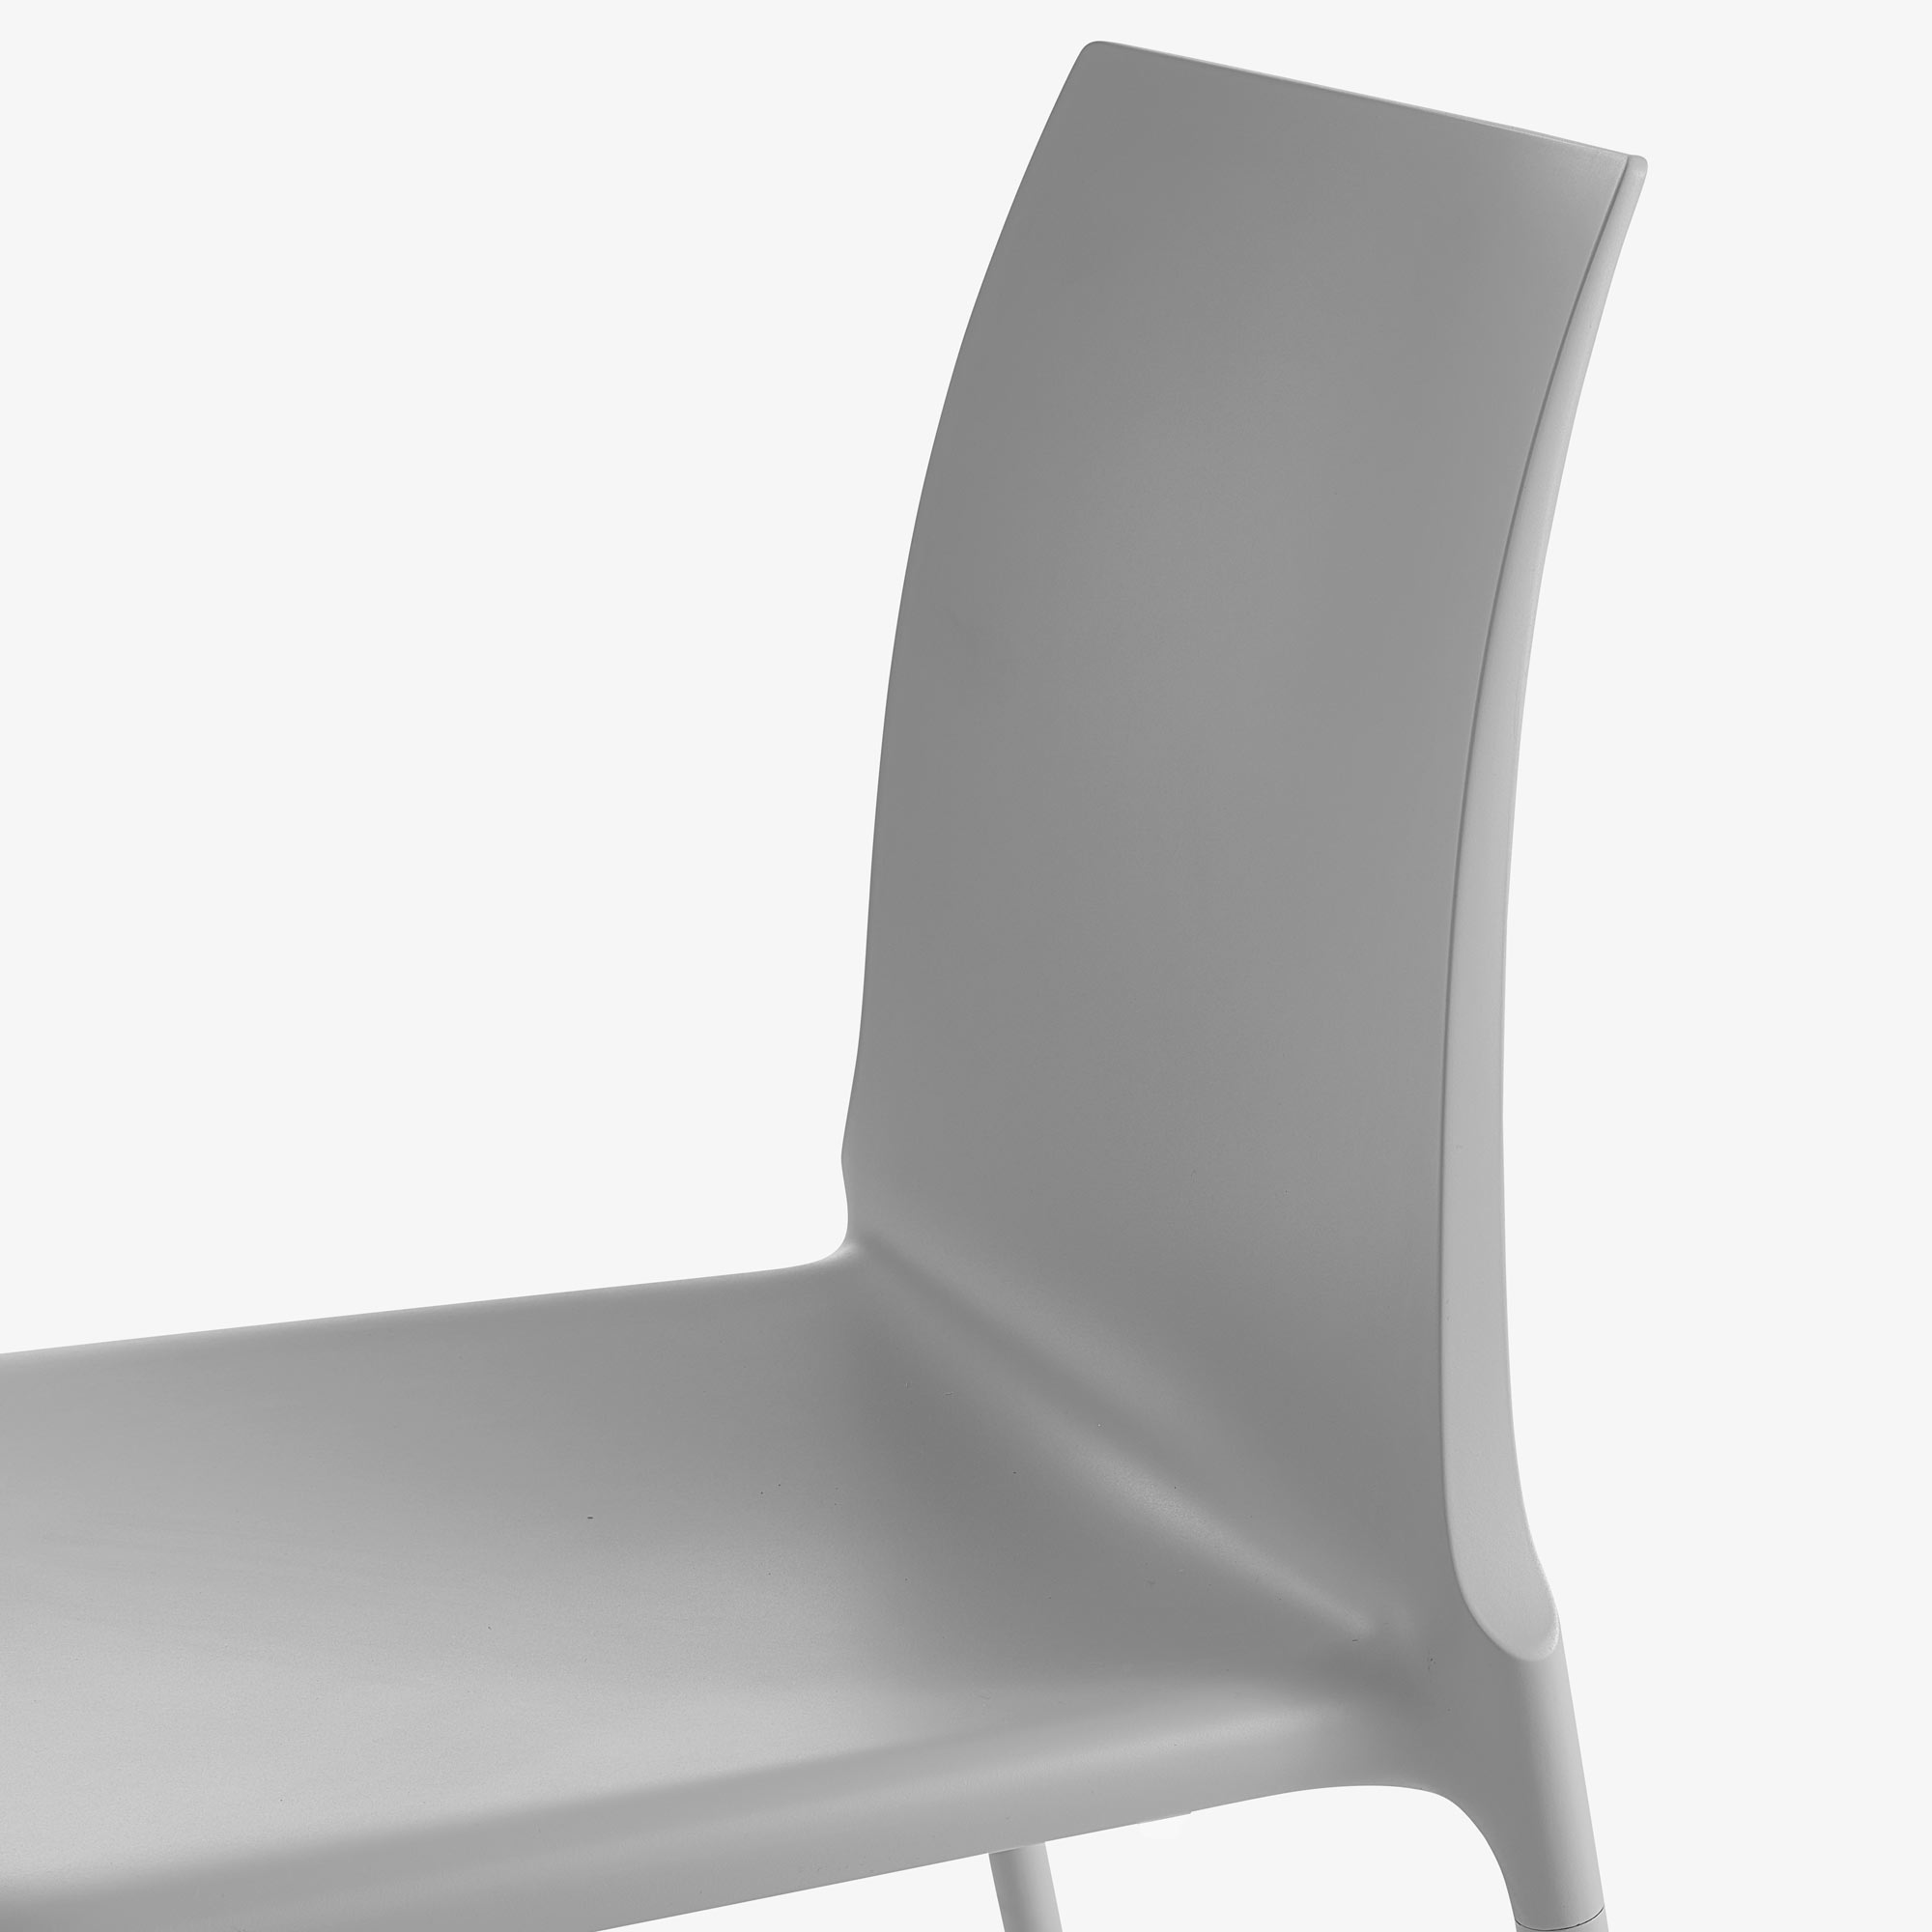 Image Chaise gris clair indoor / outdoor 8